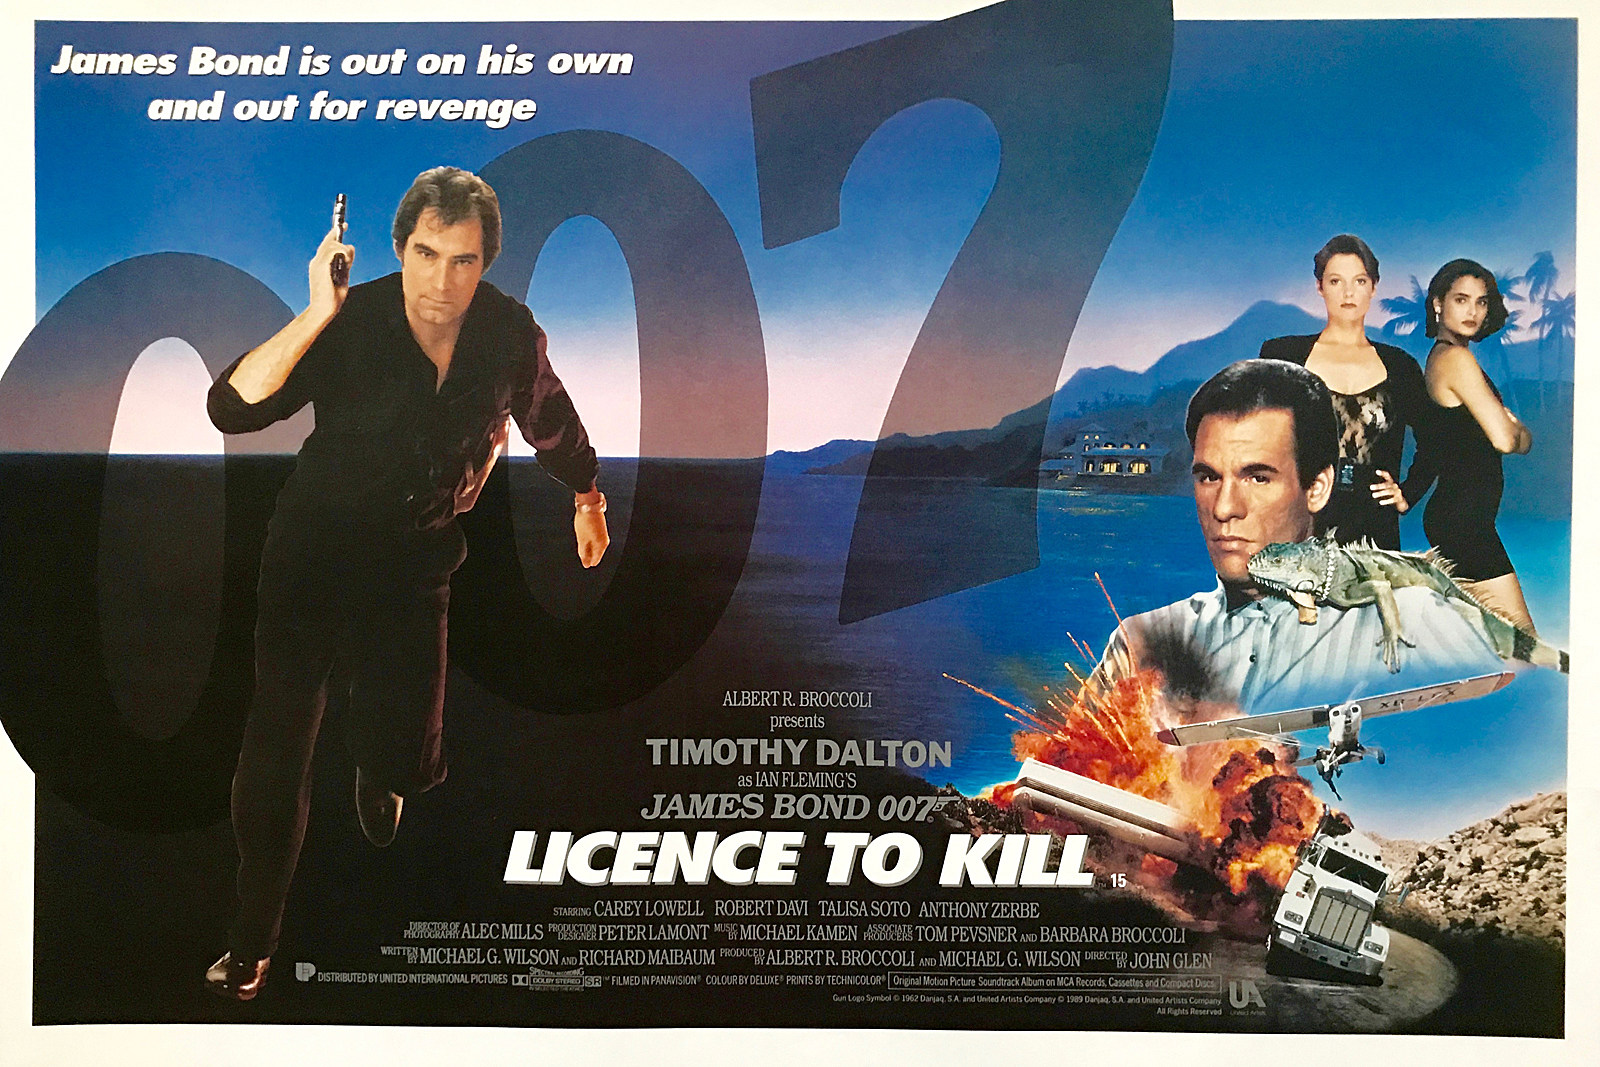 How 'License to Kill' Almost Murdered the James Bond Franchise